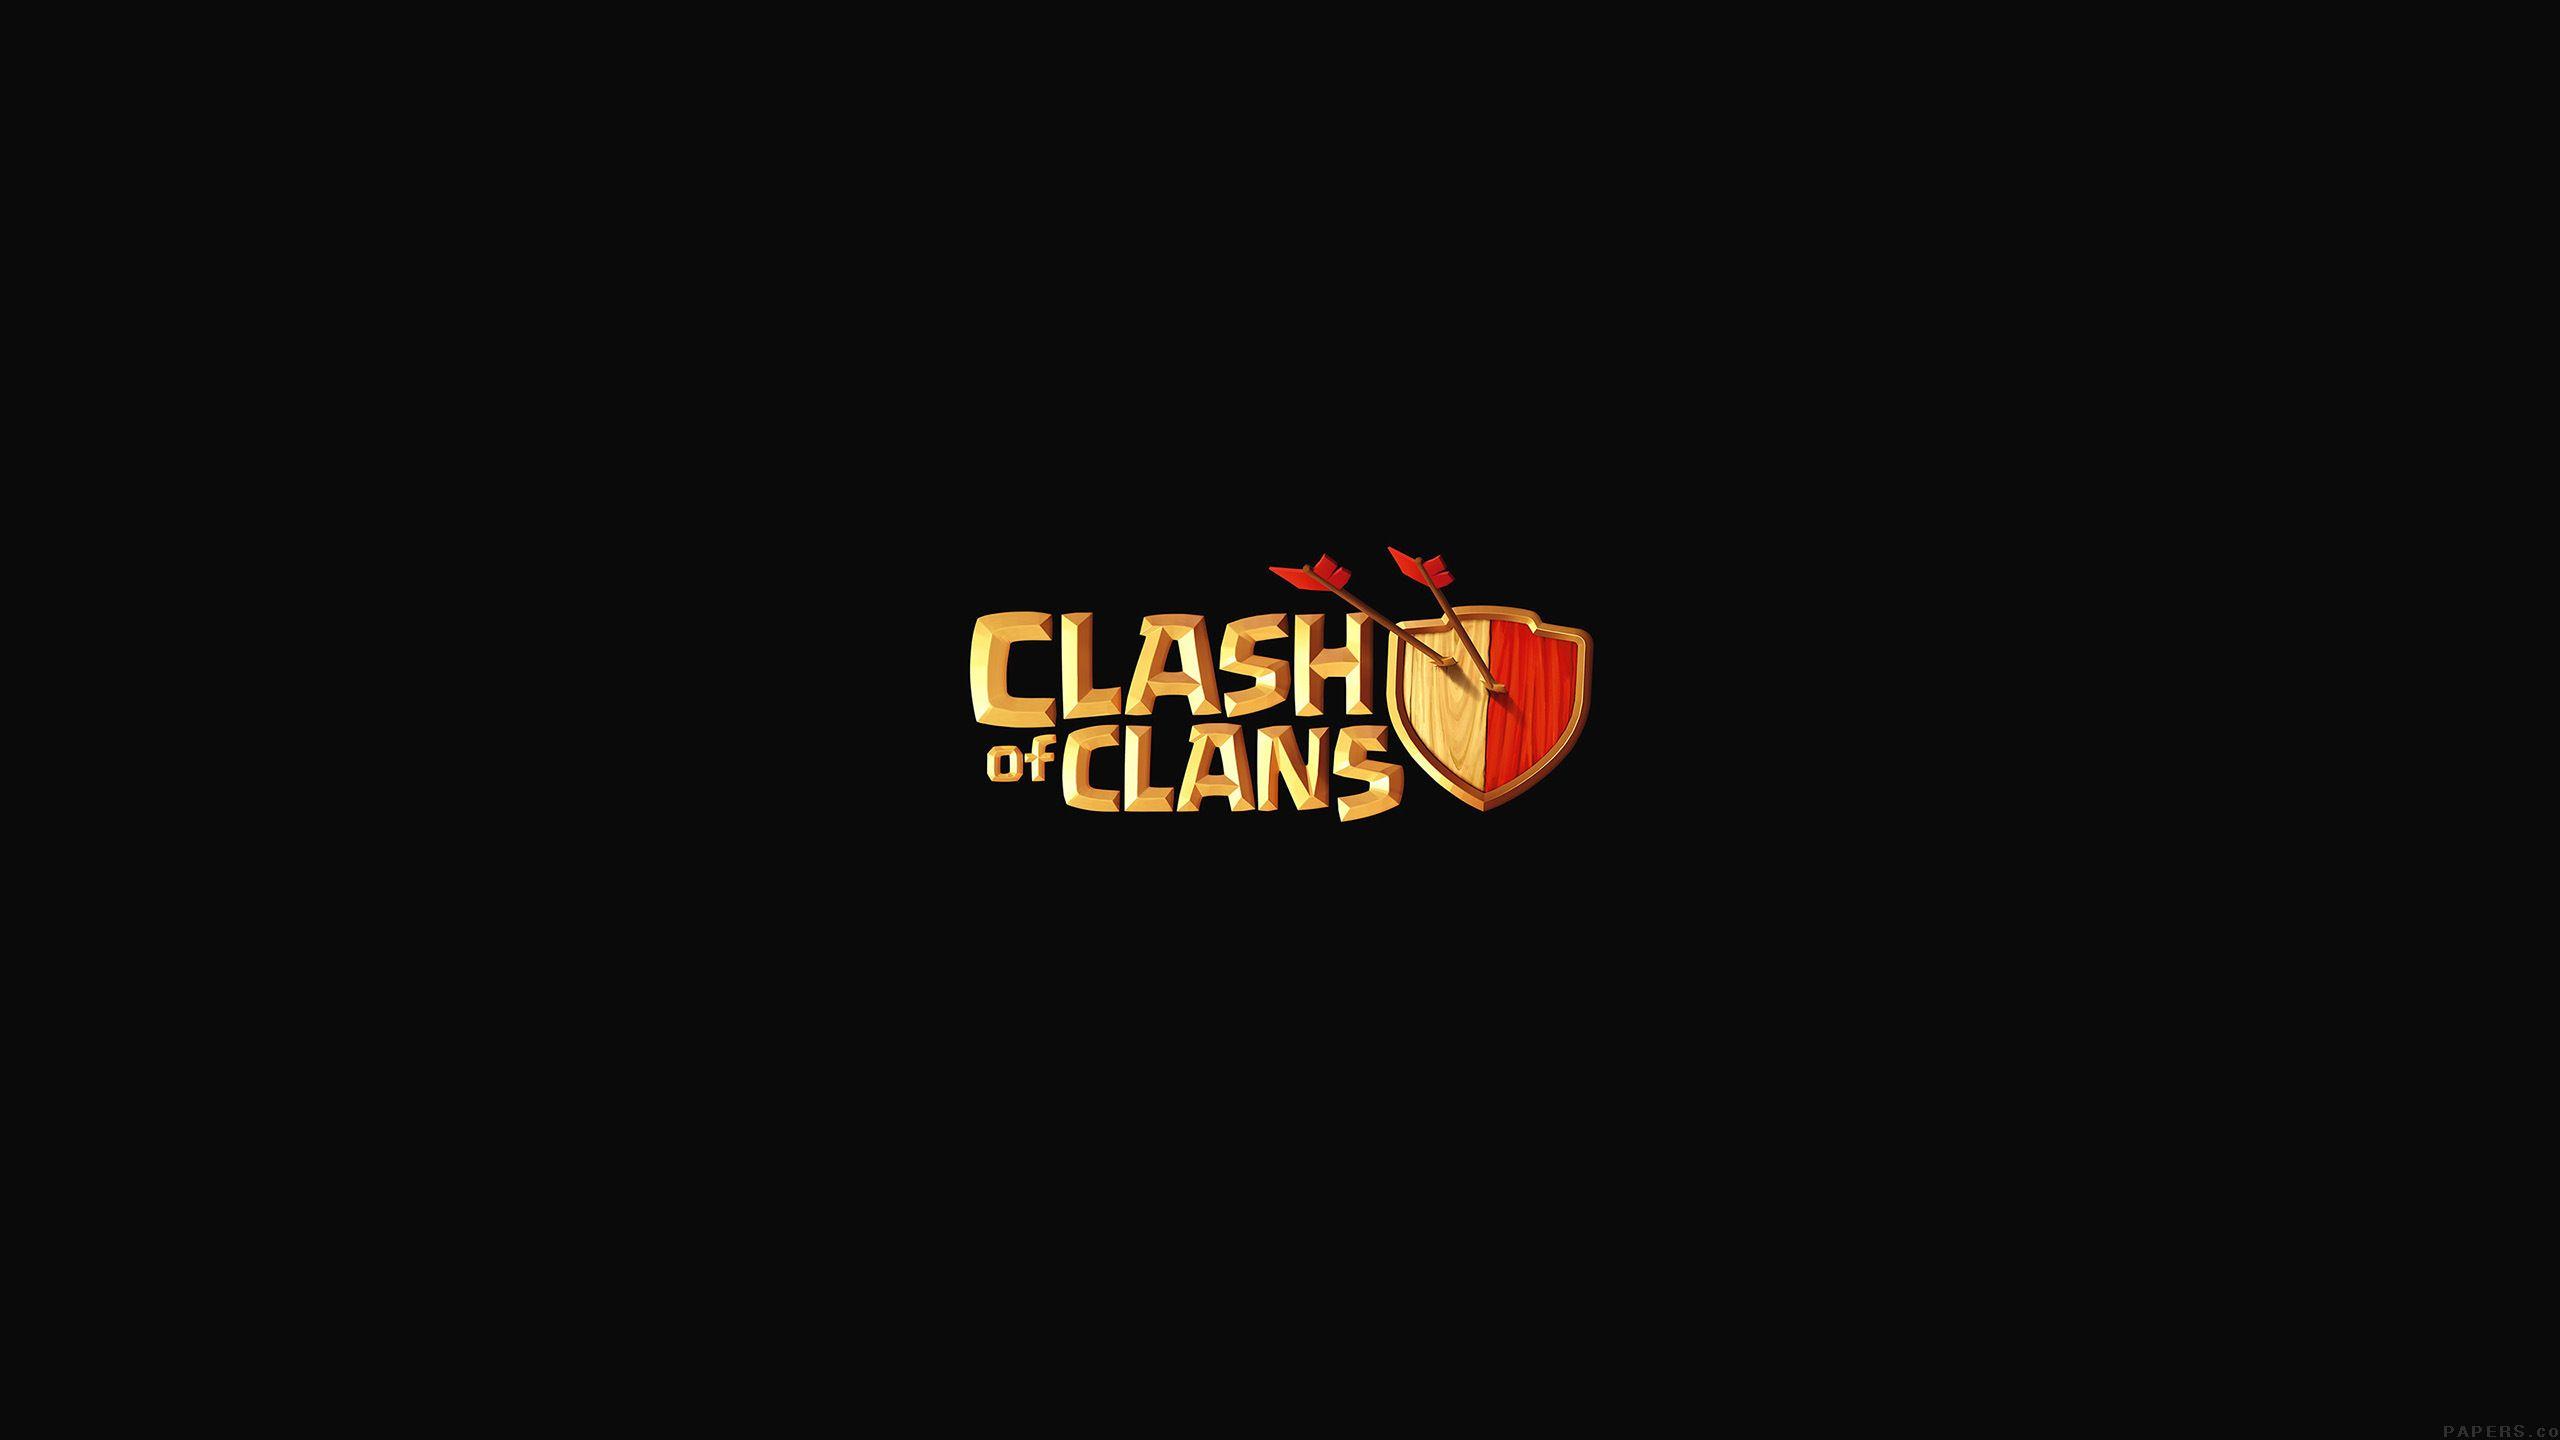 Clash of Clans Logo - Clash of Clans Logo Wallpaper Background 49063 2560x1440px